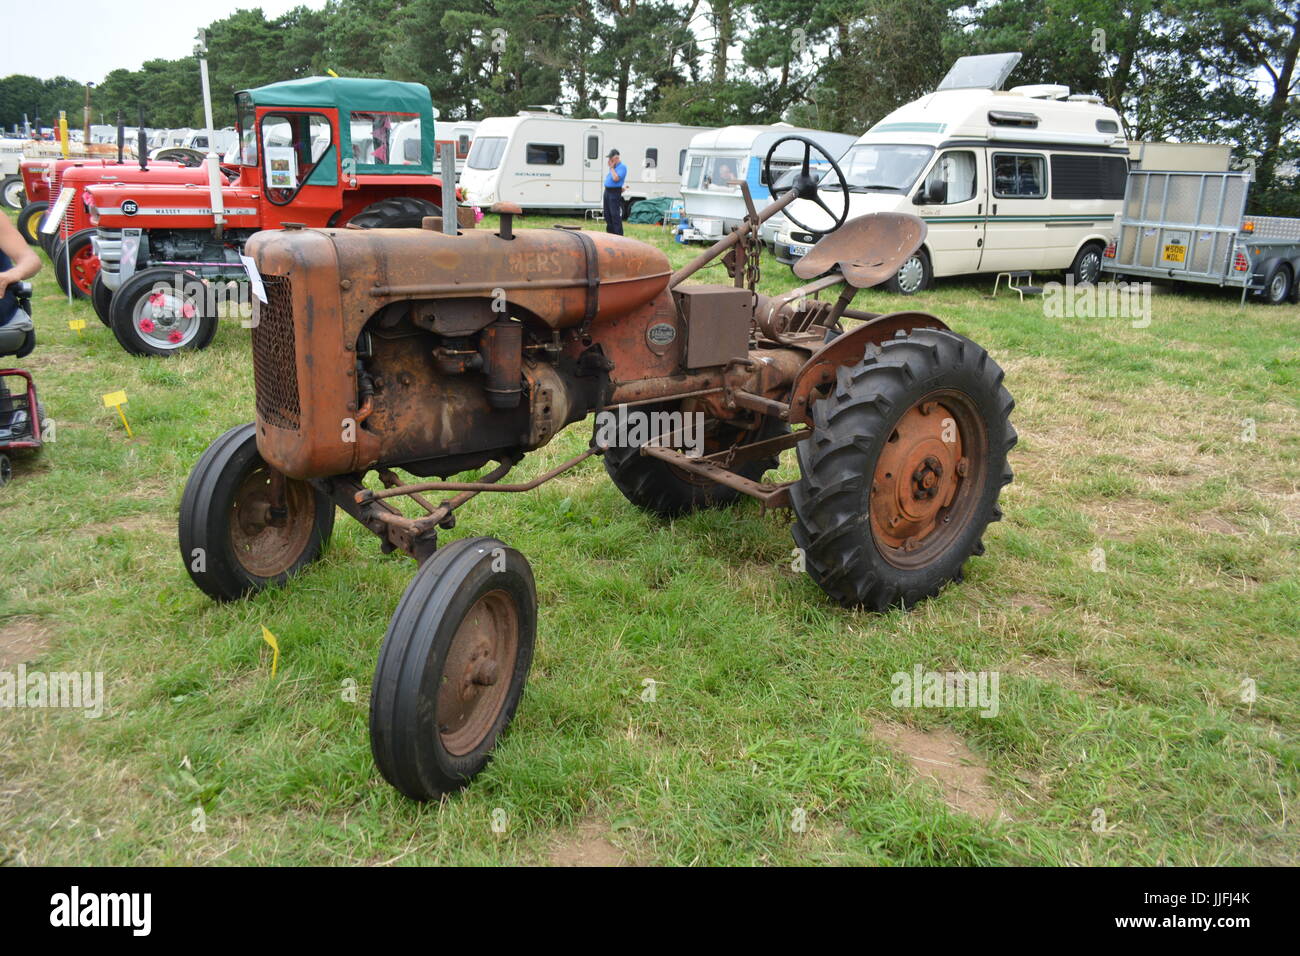 vintage tractor restored, on display at show Stock Photo